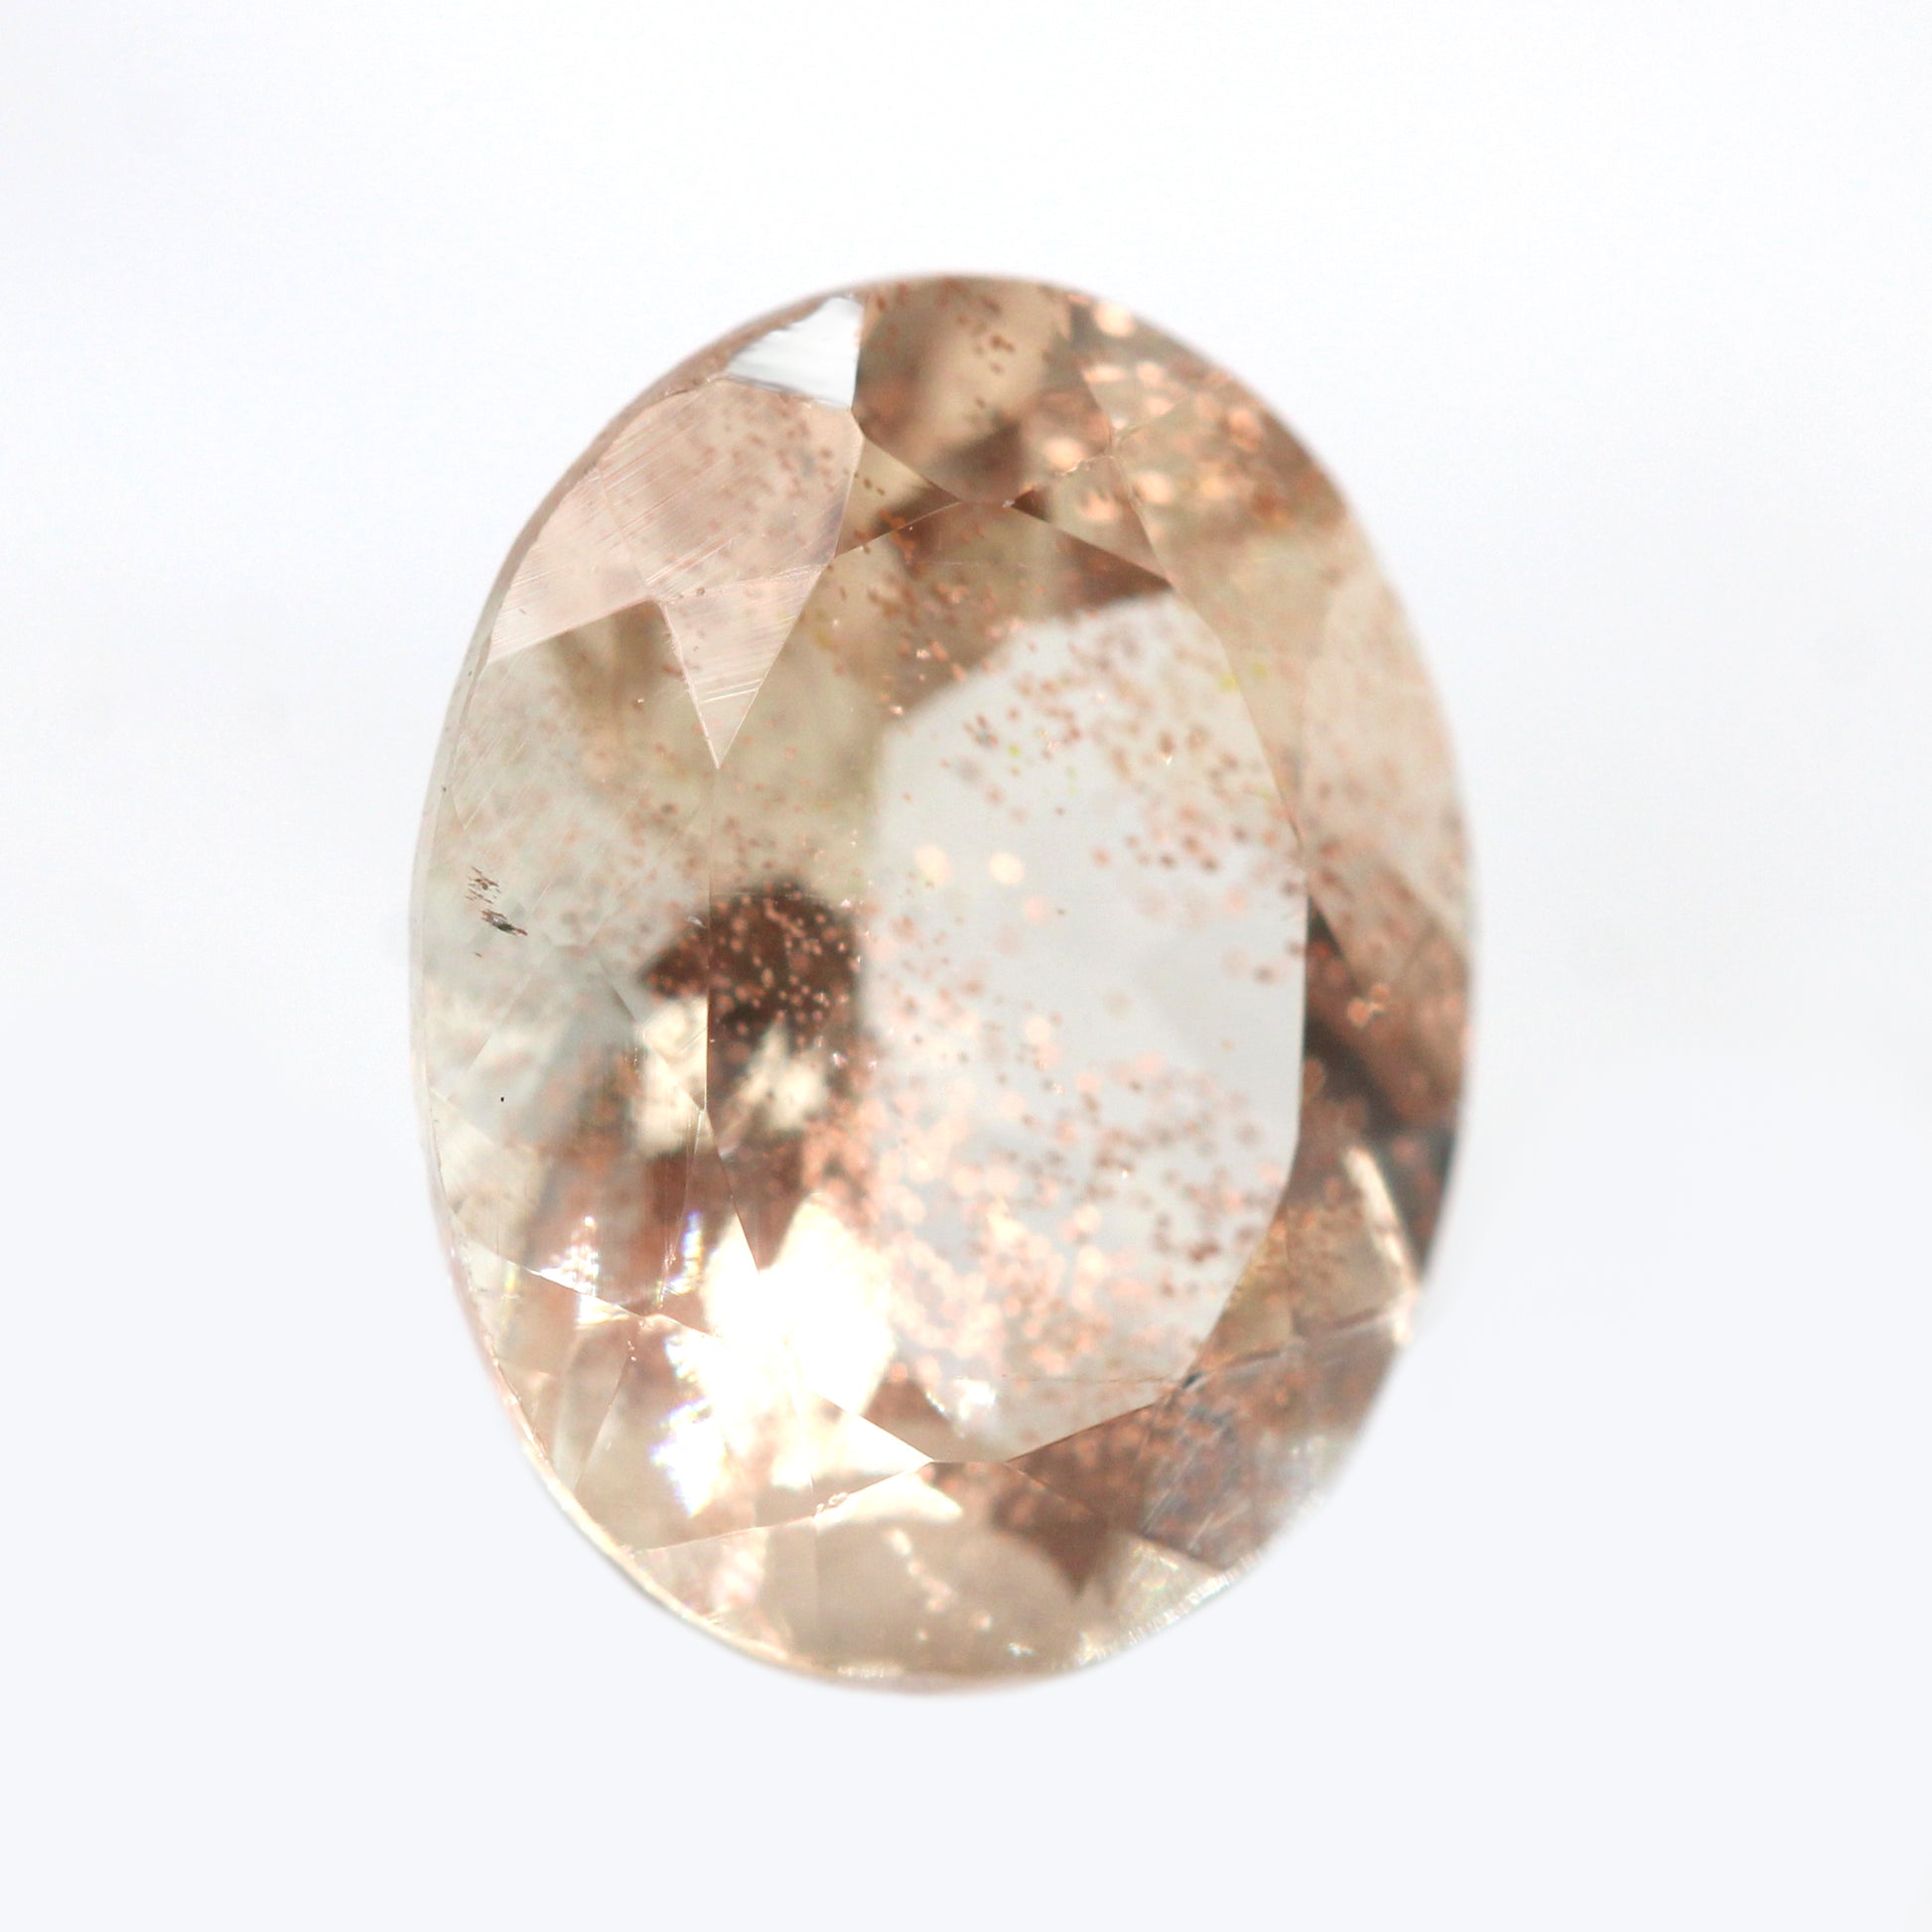 CAELEN (M) 1.70 Carat Golden Oval Sunstone for Custom Work - Inventory Code OSUN170 - Midwinter Co. Alternative Bridal Rings and Modern Fine Jewelry